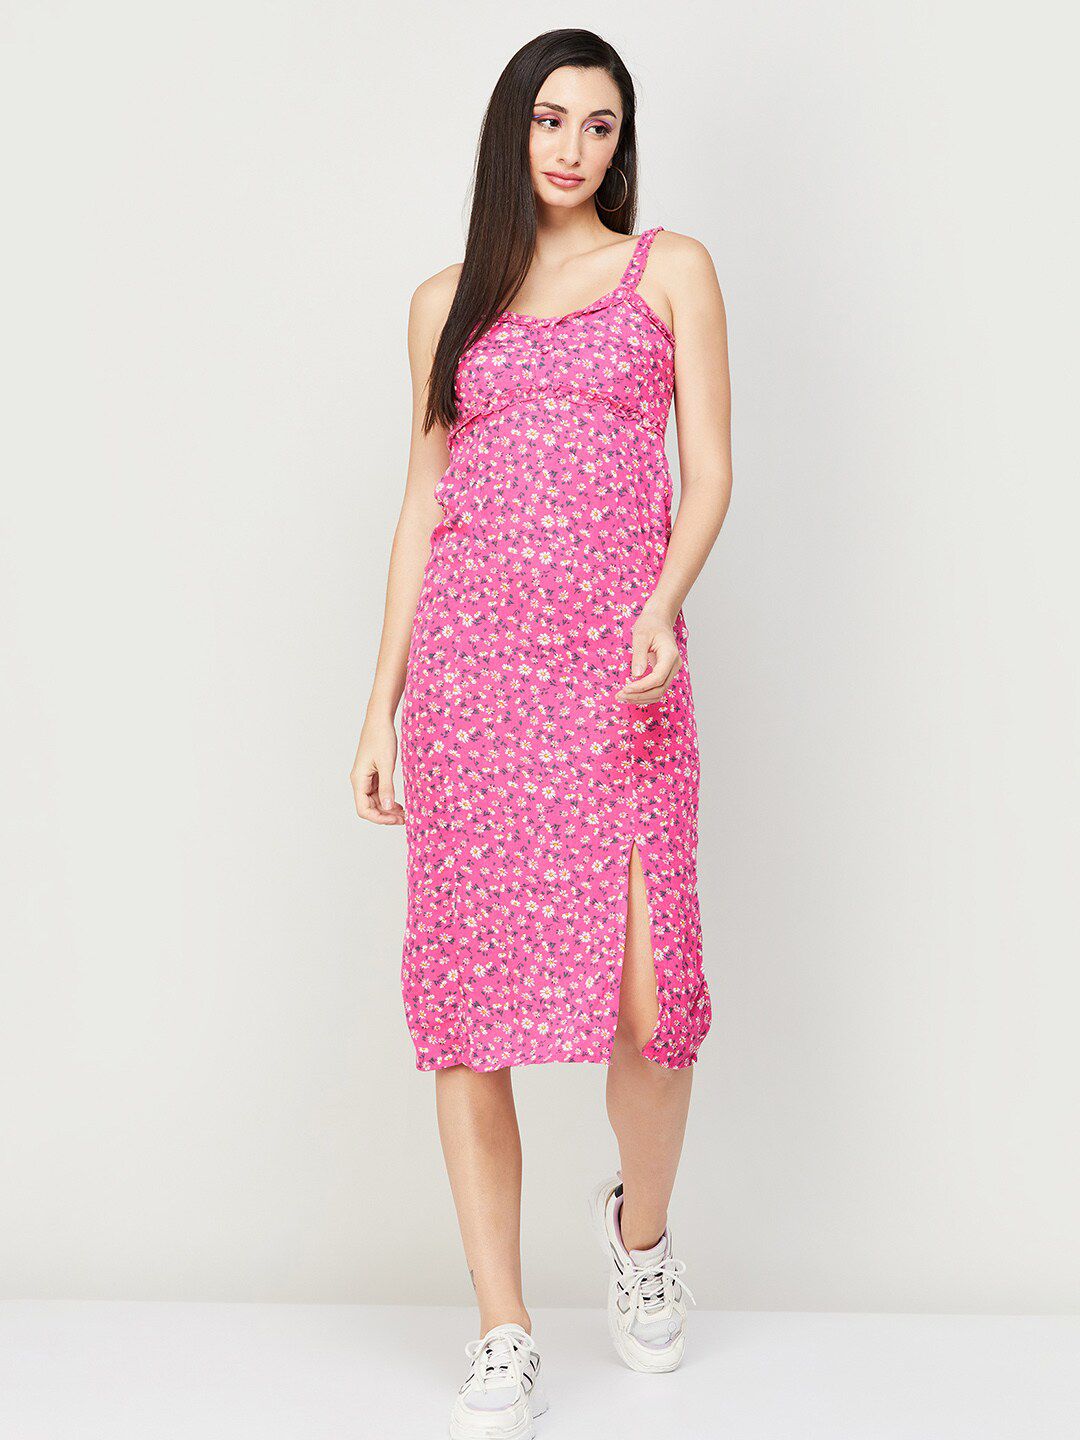 Ginger by Lifestyle Floral Printed Shoulder Straps Sleeveless A-Line Dress Price in India